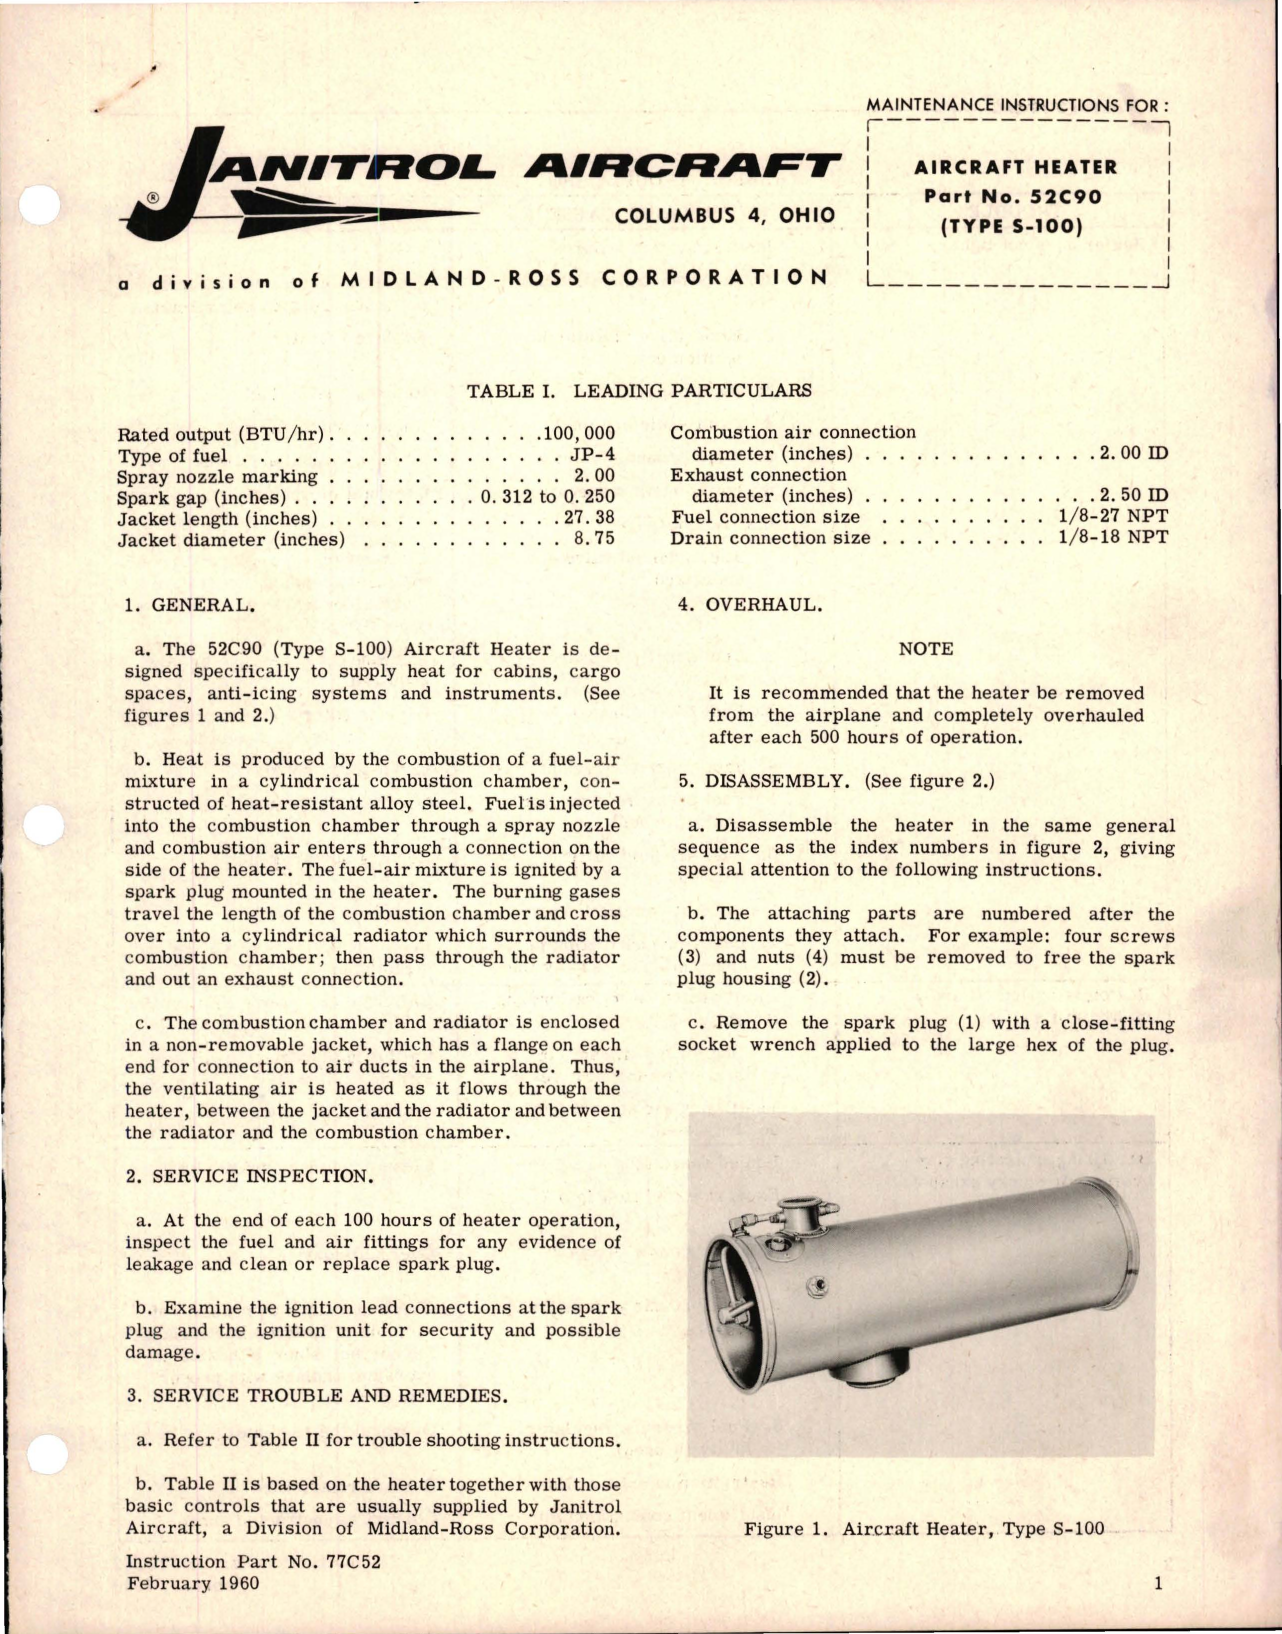 Sample page 1 from AirCorps Library document: Maintenance Instructions for Aircraft Heater - Part 52C90 - Type S-100